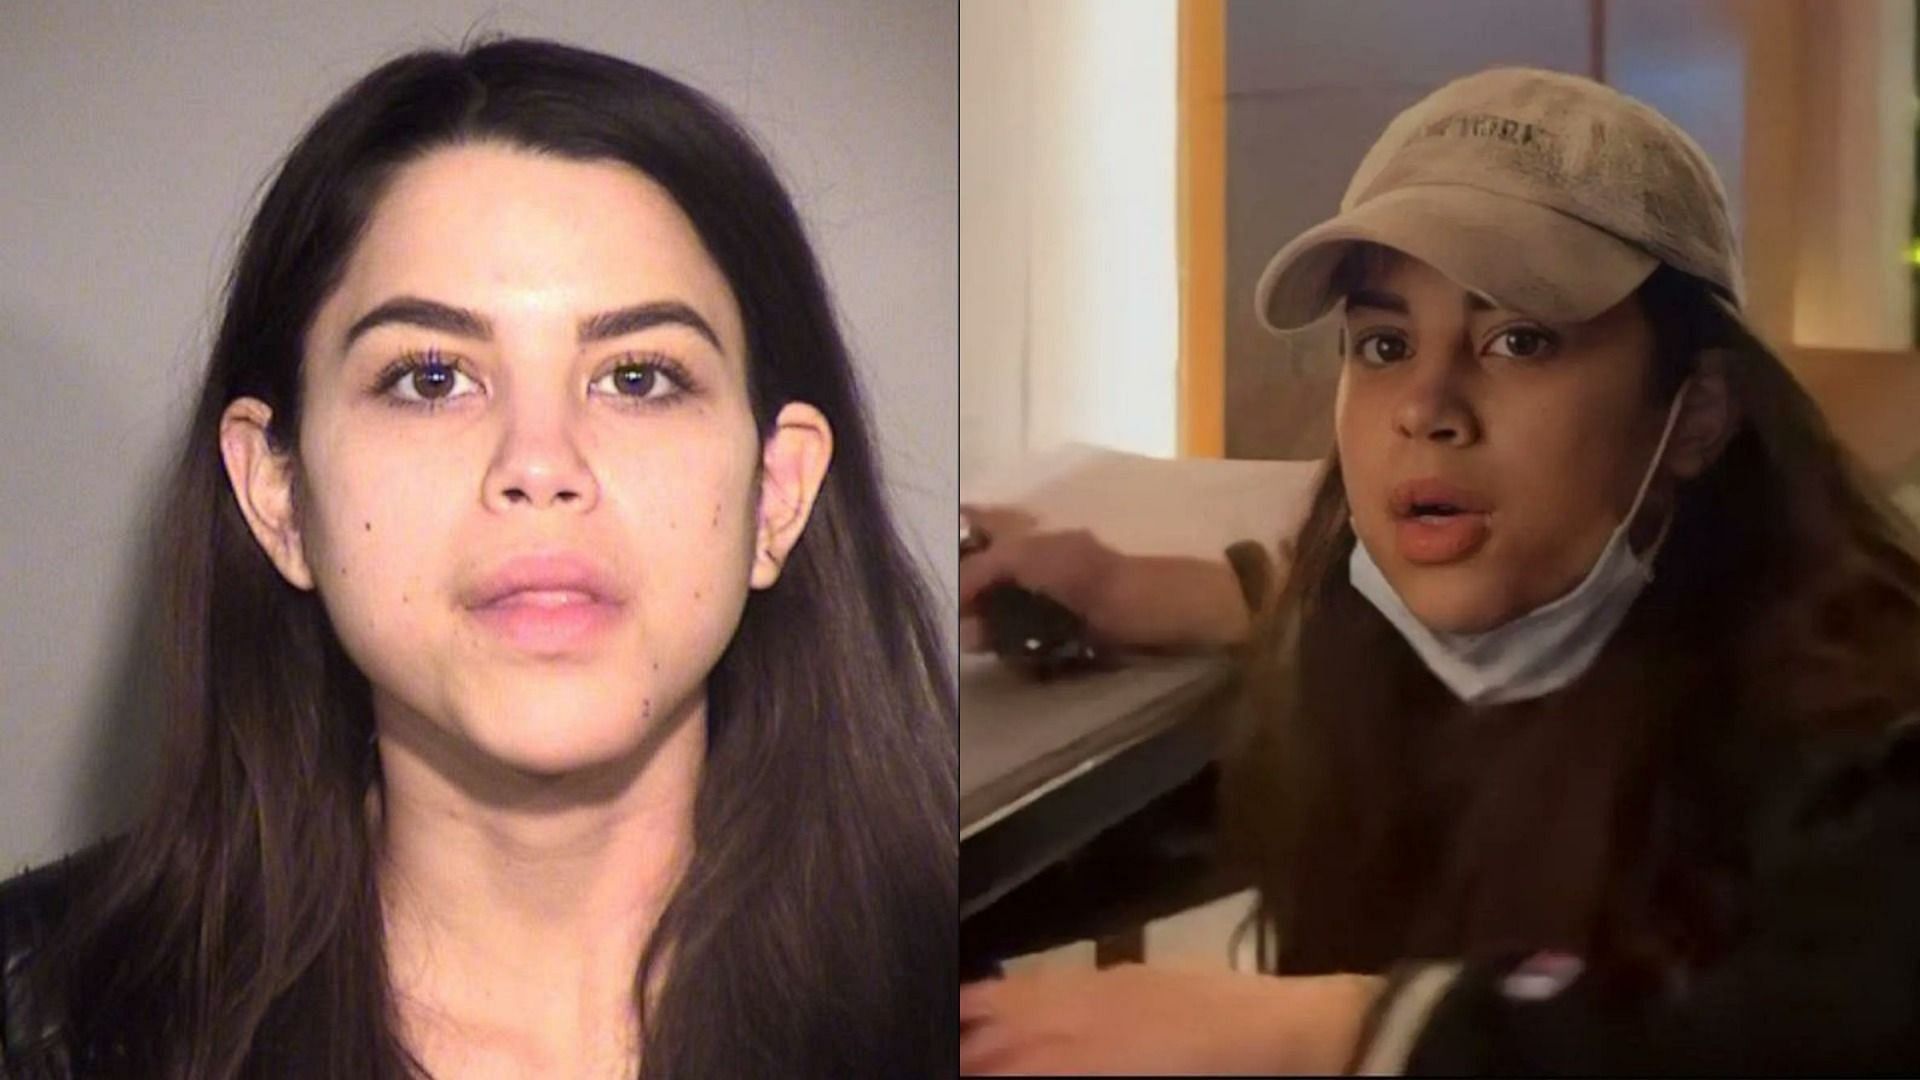 Miya Ponsetto pled guilty to a hate crime for falsely accusing and assaulting an African-American teenager in 2020 (Image via Ventura County Sheriff&#039;s Office and Philip Lewis/Twitter)